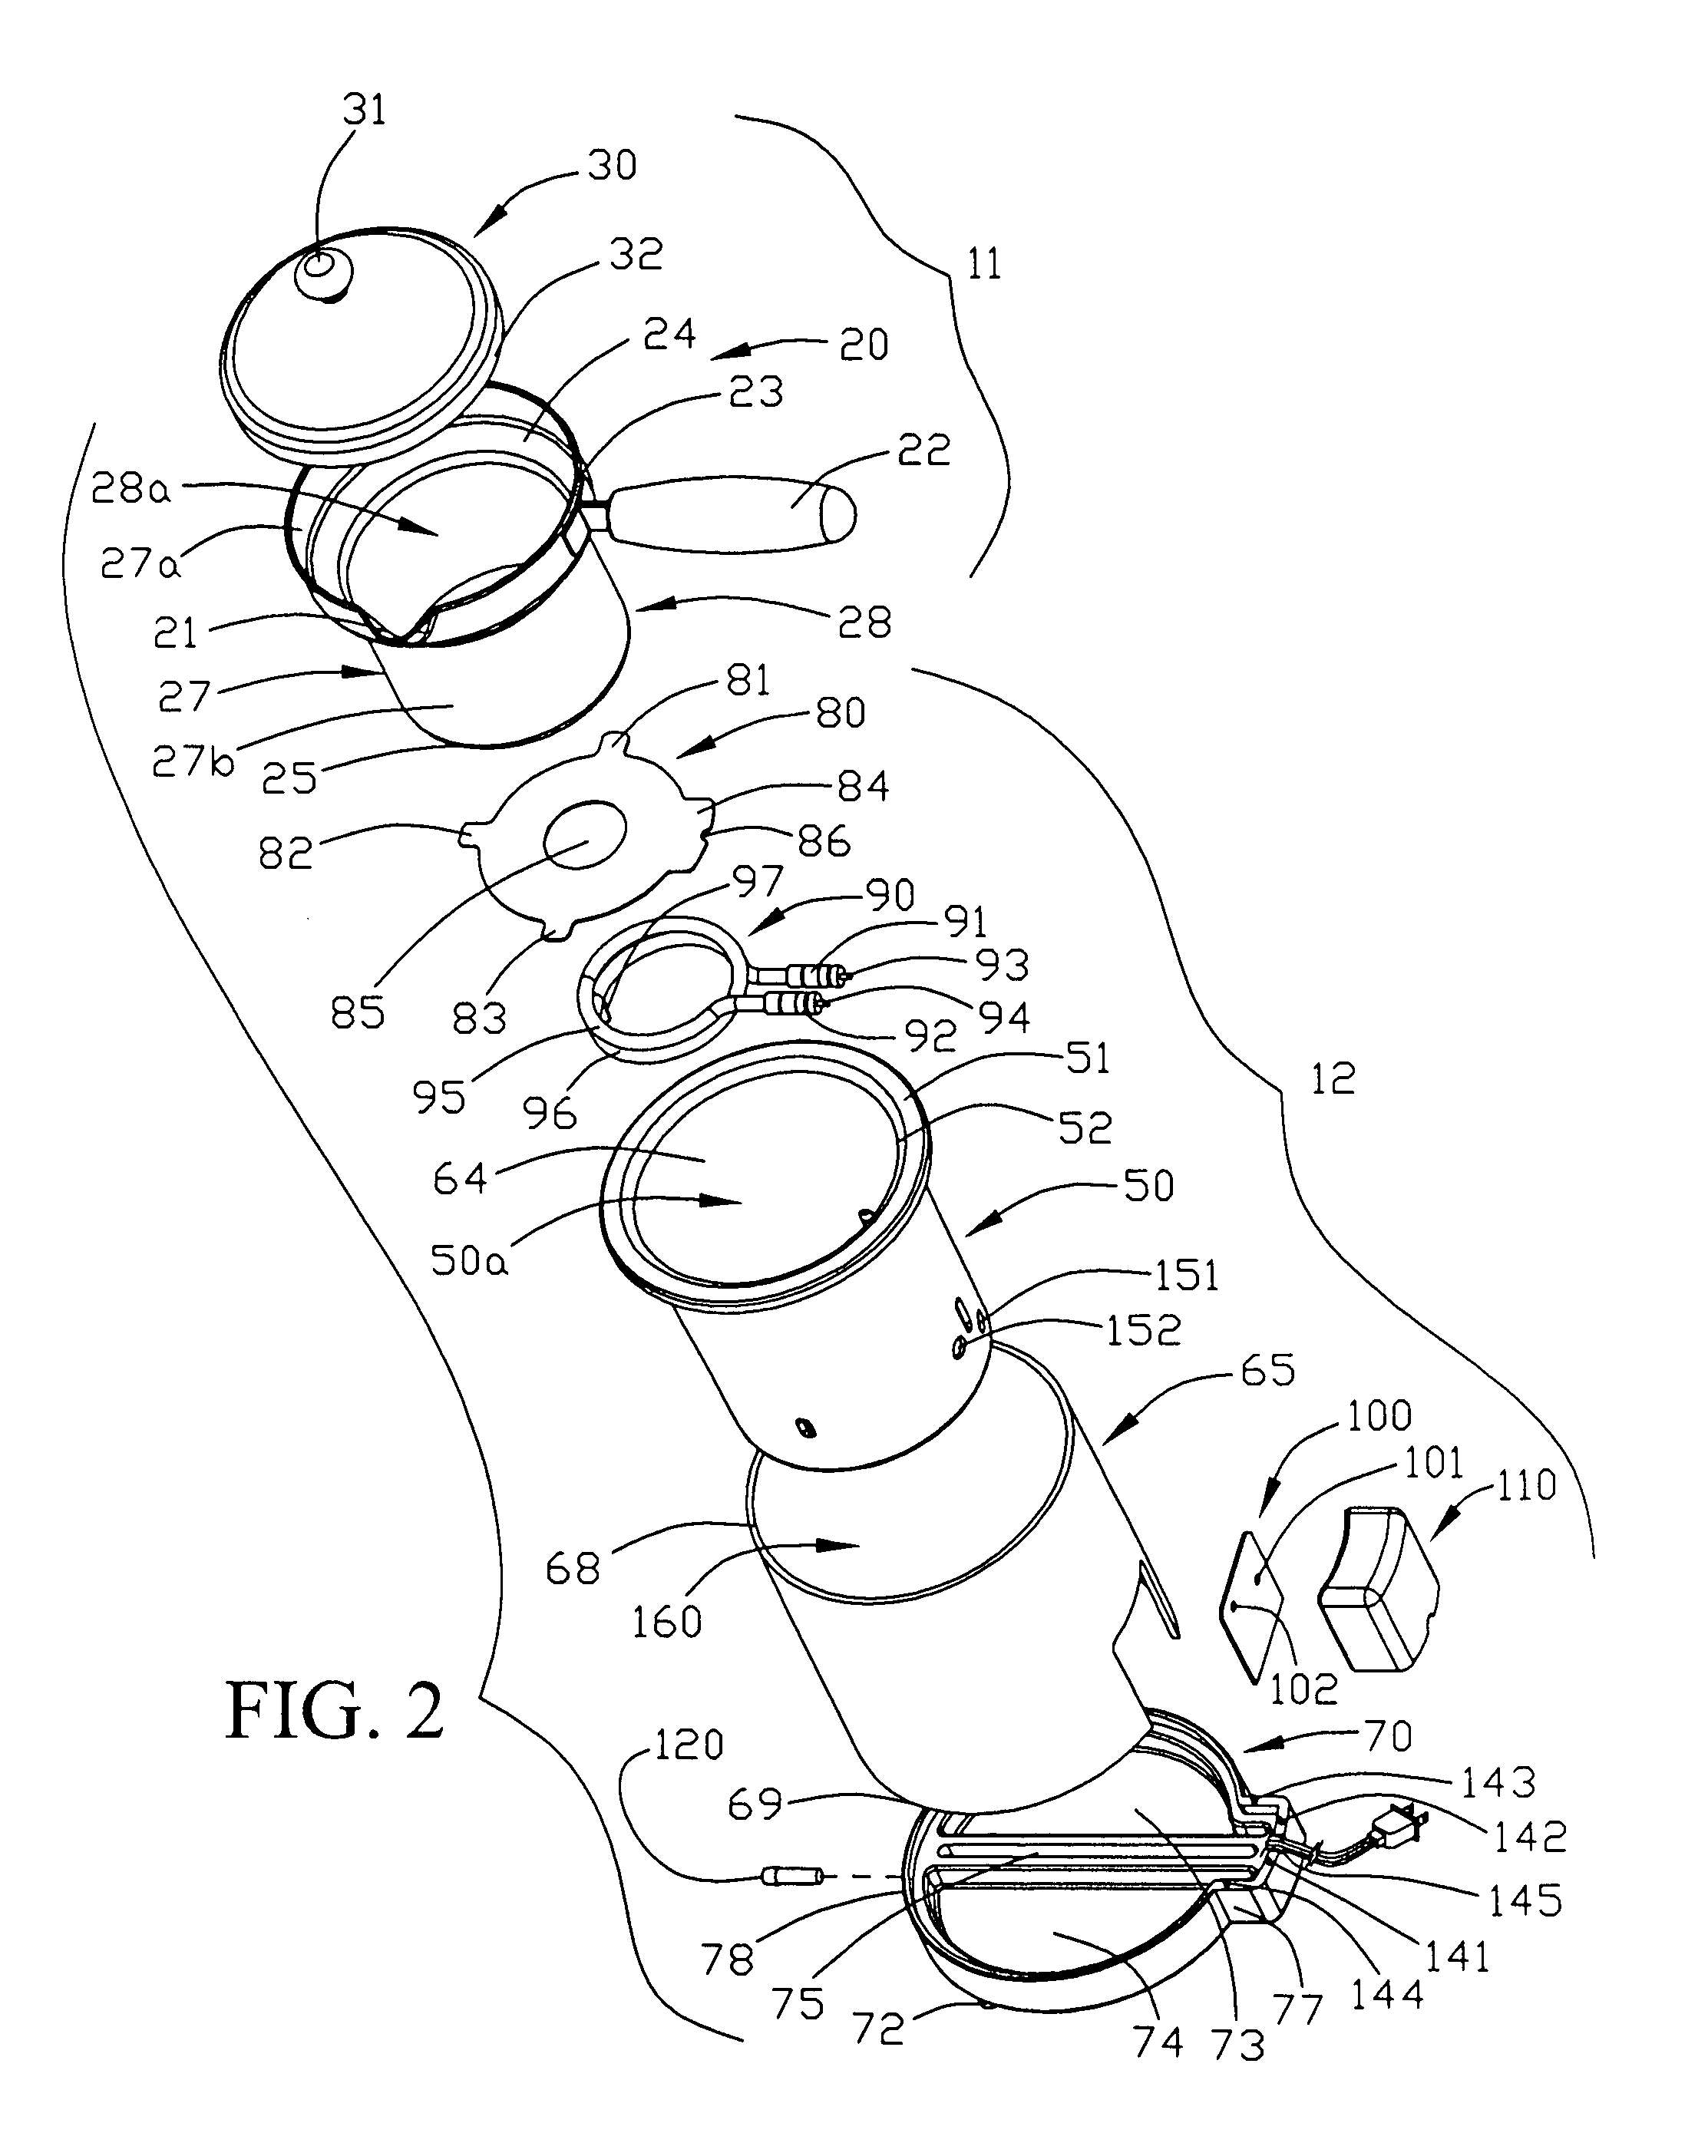 Heating apparatus with removable container, such as for foodstuffs, and features for moderating heat flux to the removable container